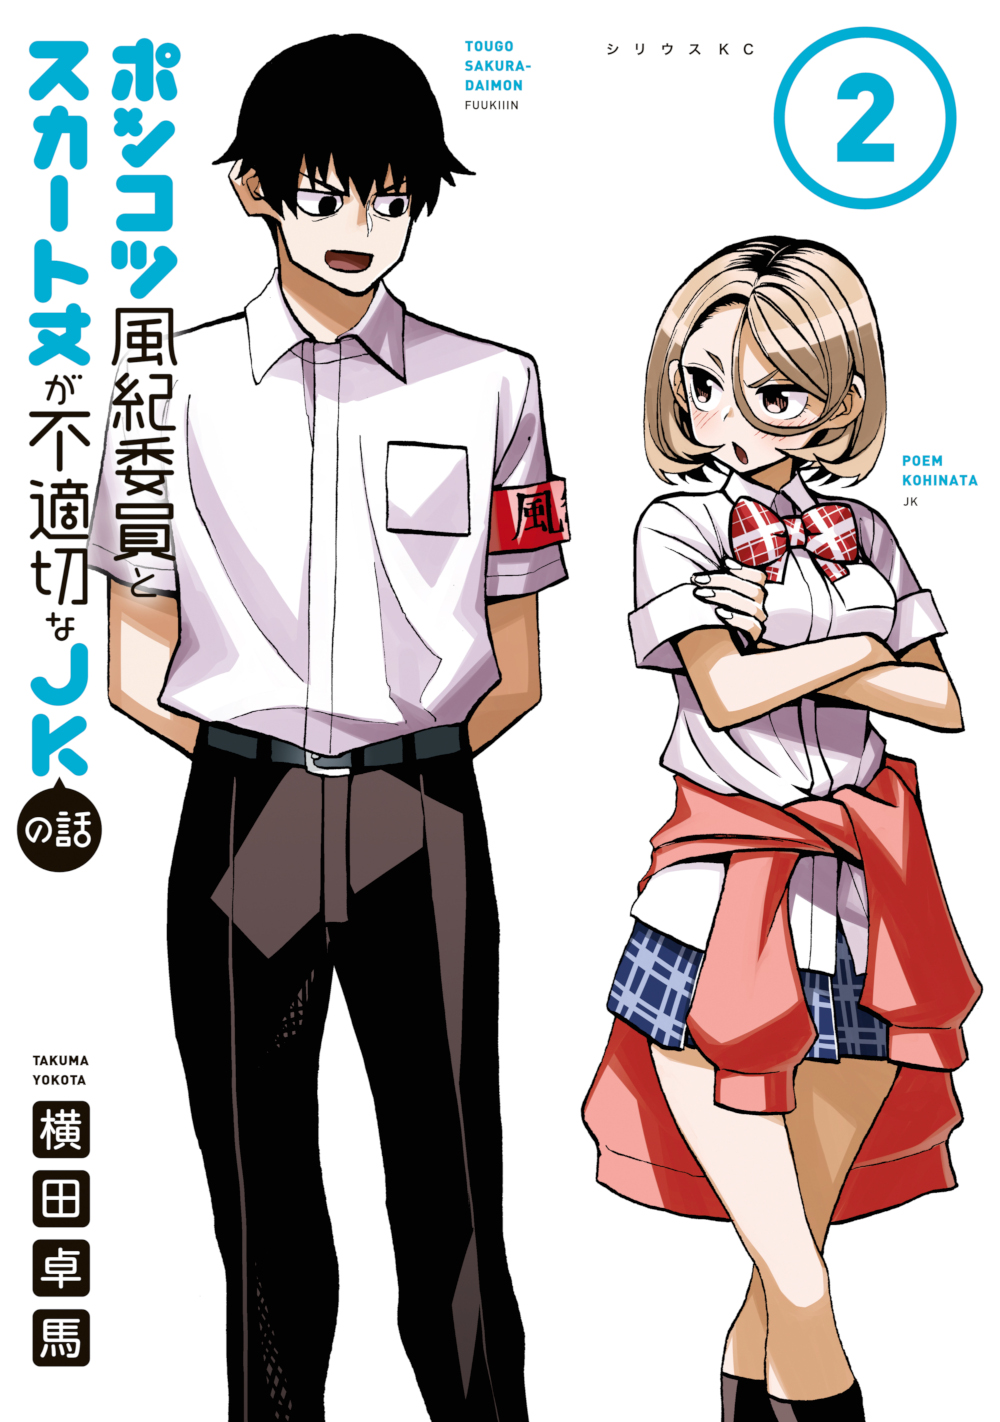 The Story Between a Dumb Prefect and a High School Girl with an Inappropriate Skirt Length Manga